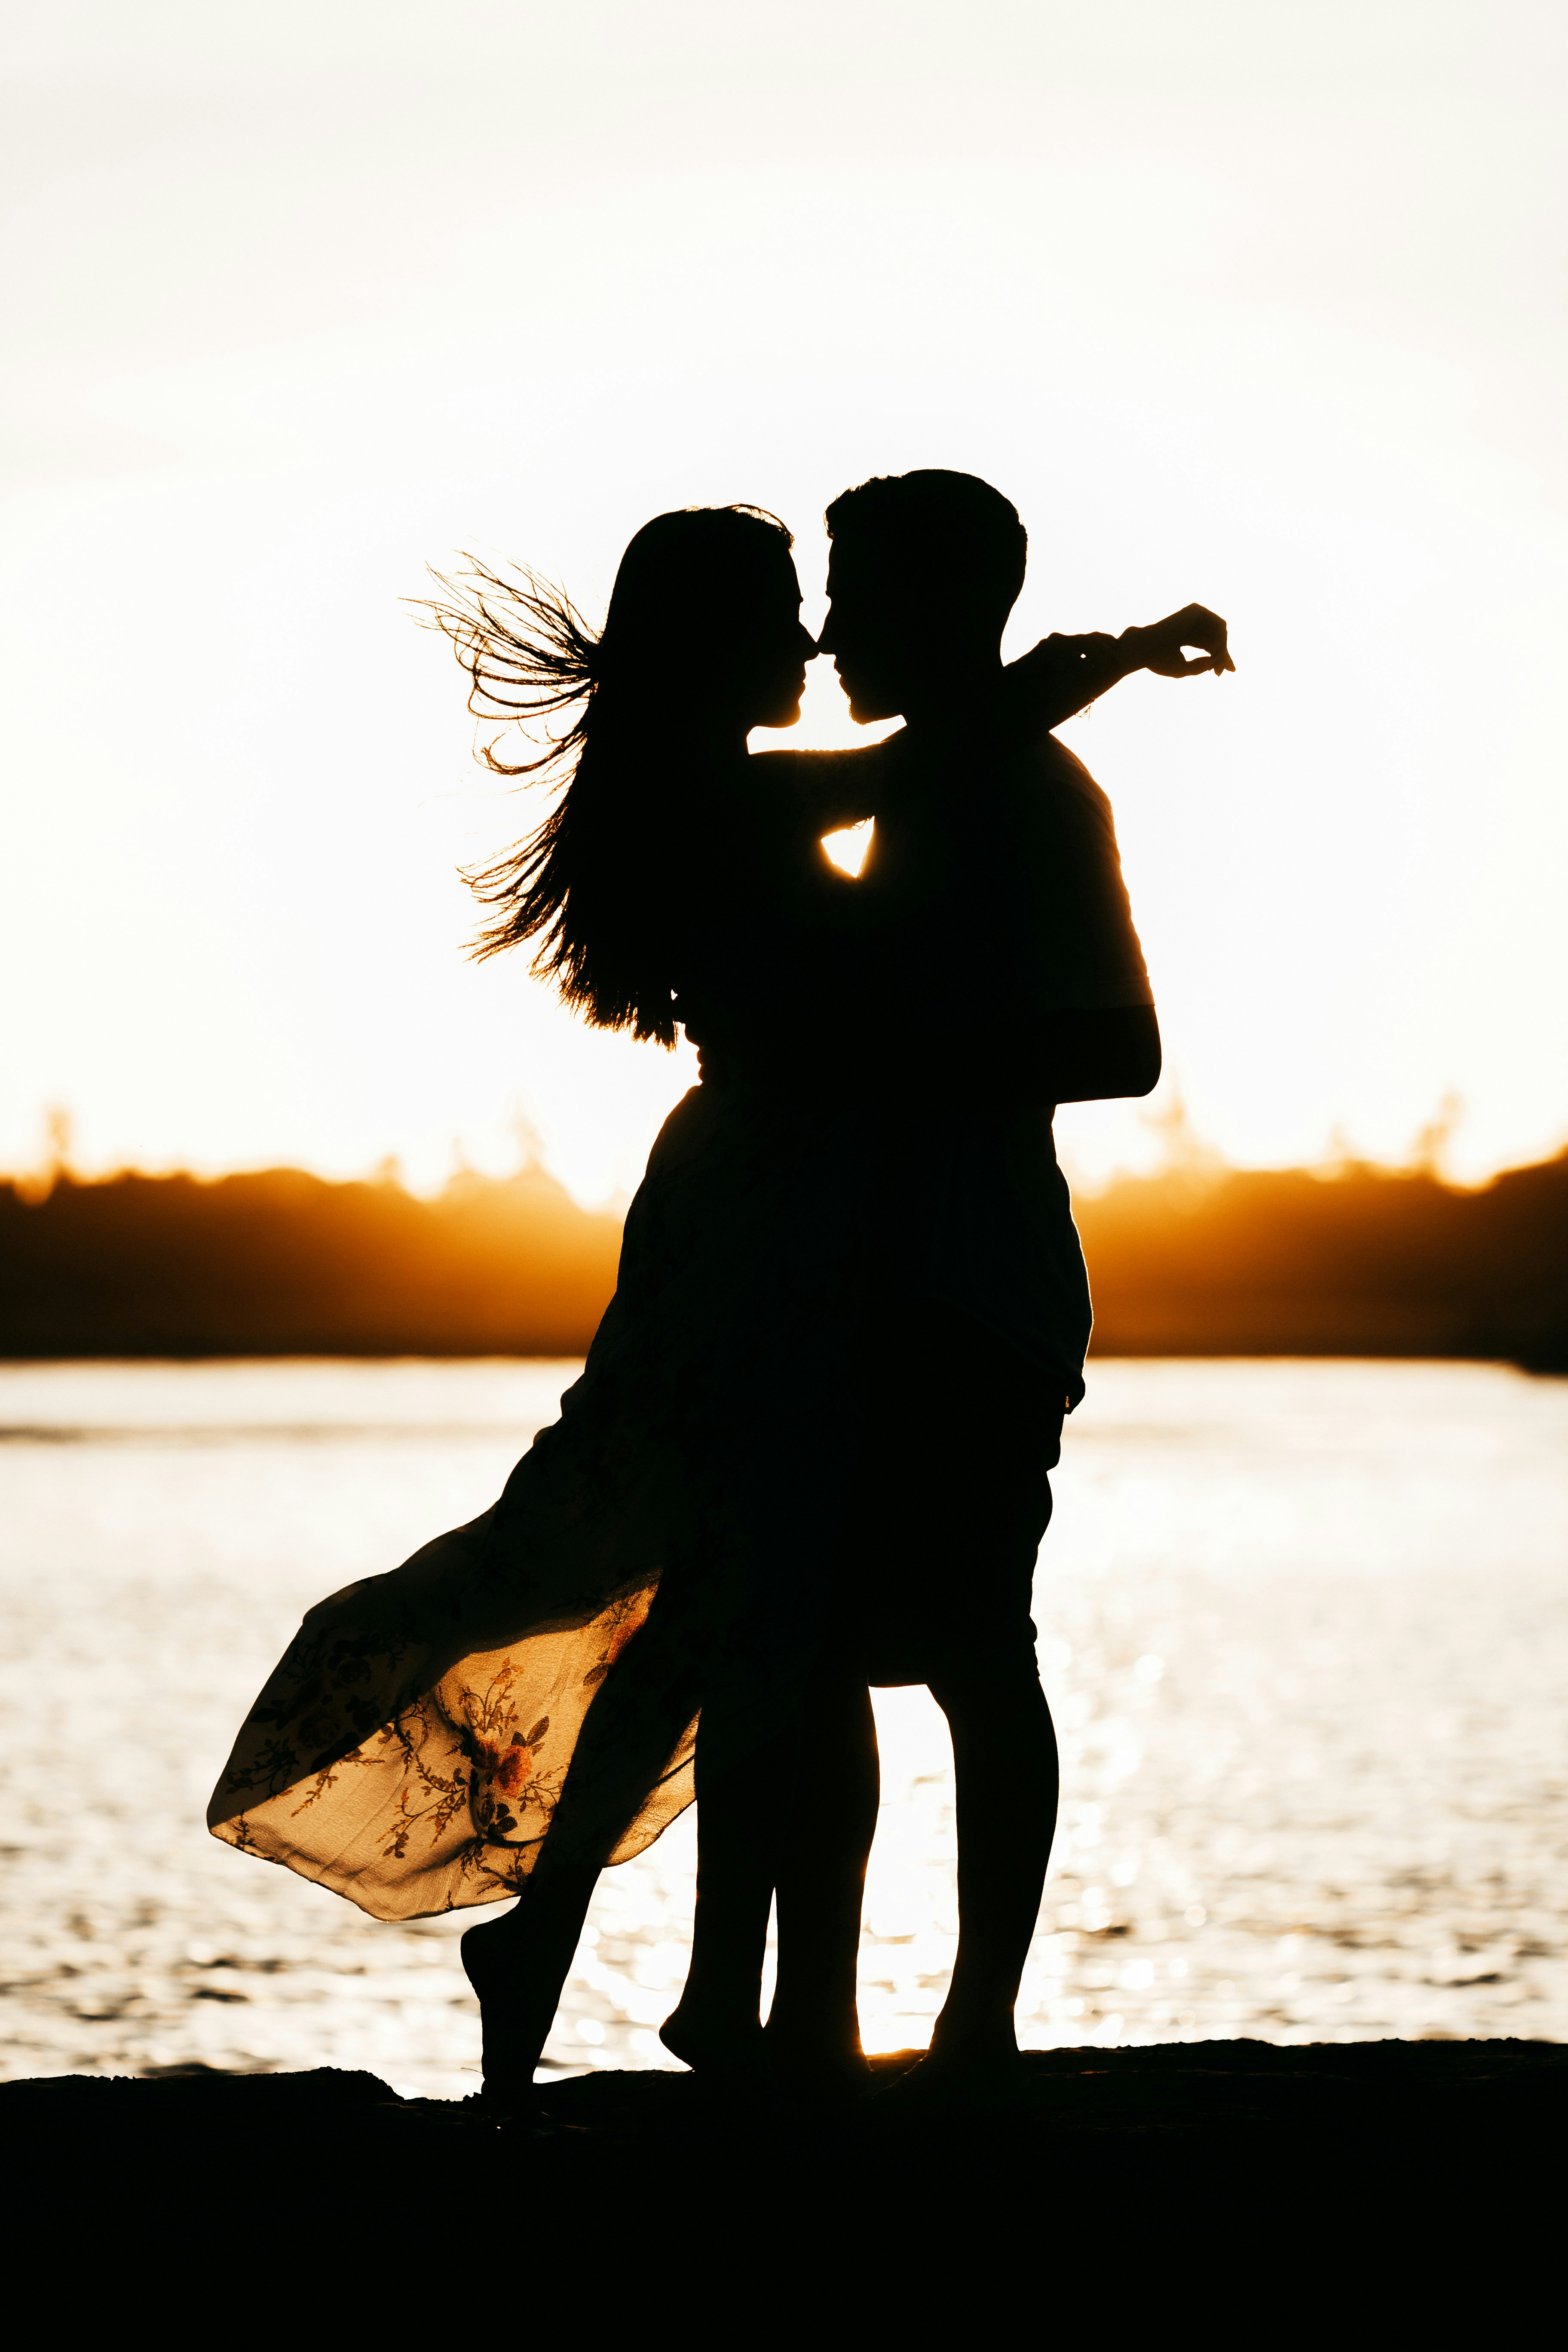 500+ Couple At Beach Pictures HD Download Free Images on Unsplash pic